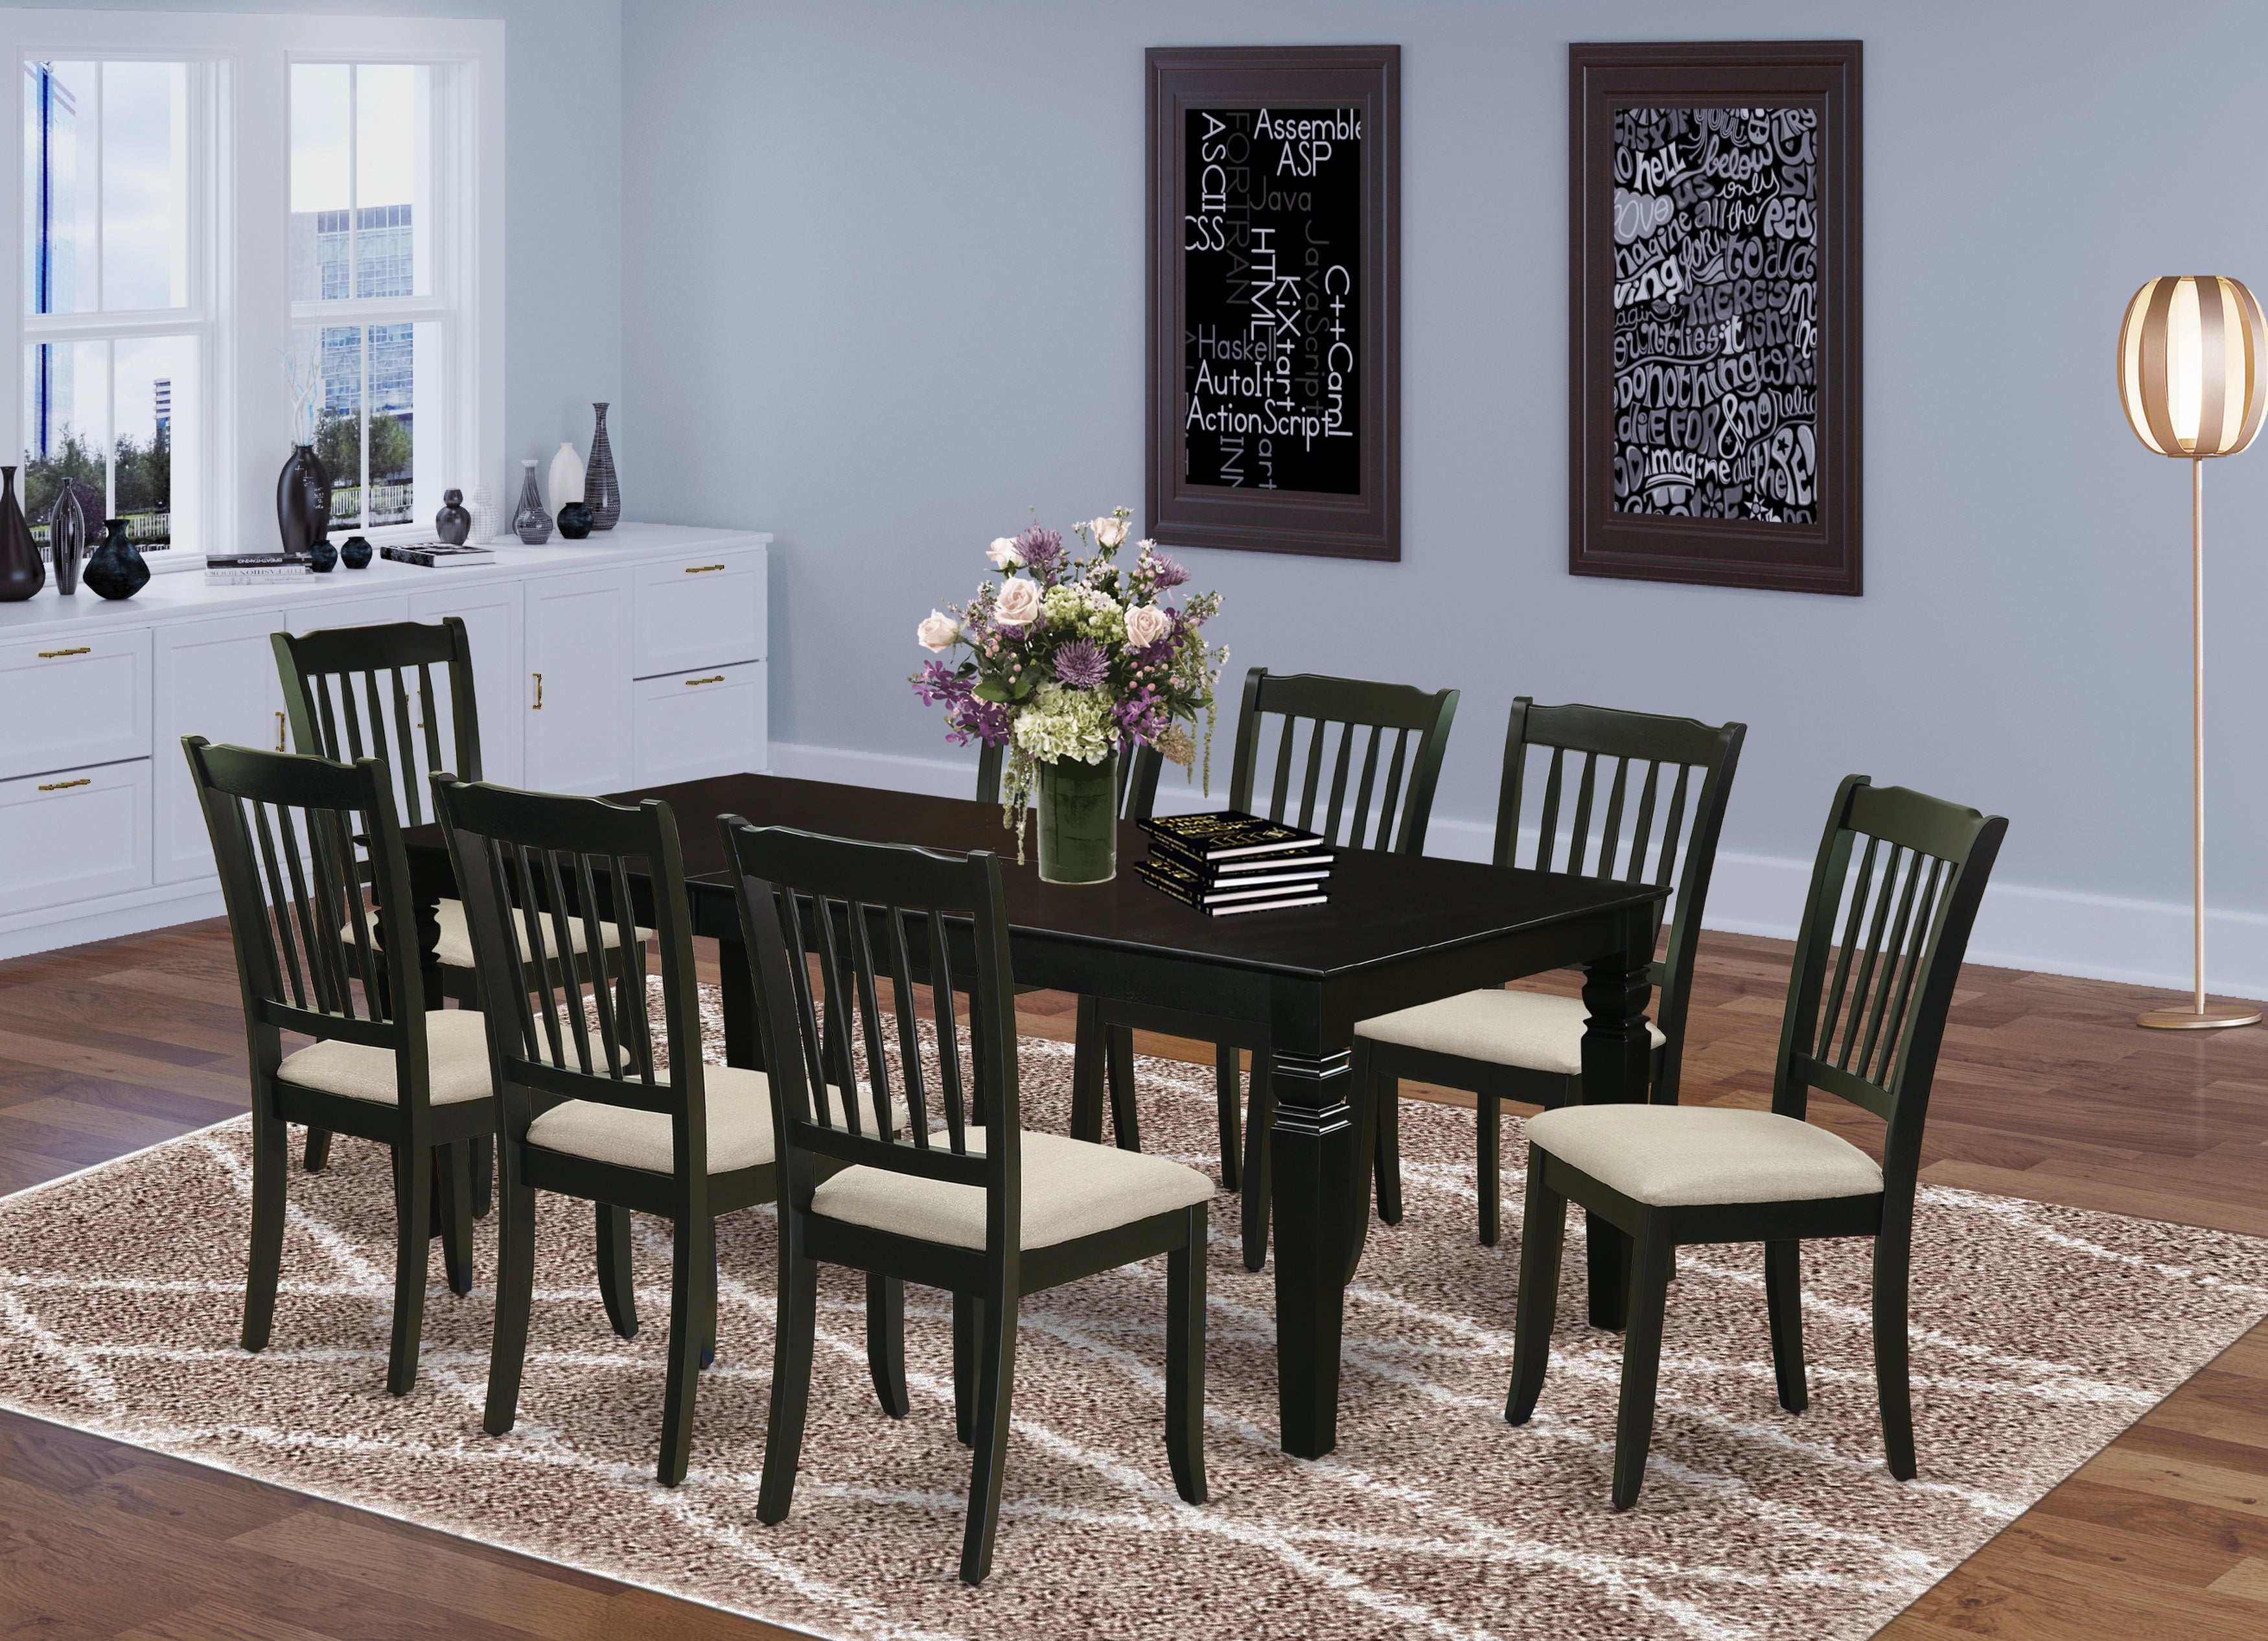 LGDA9-BLK-C 9Pc Dining Set Includes a Rectangle Dining Table with Butterfly Leaf and Eight Vertical Slatted Microfiber Seat Kitchen Chairs, Black Finish